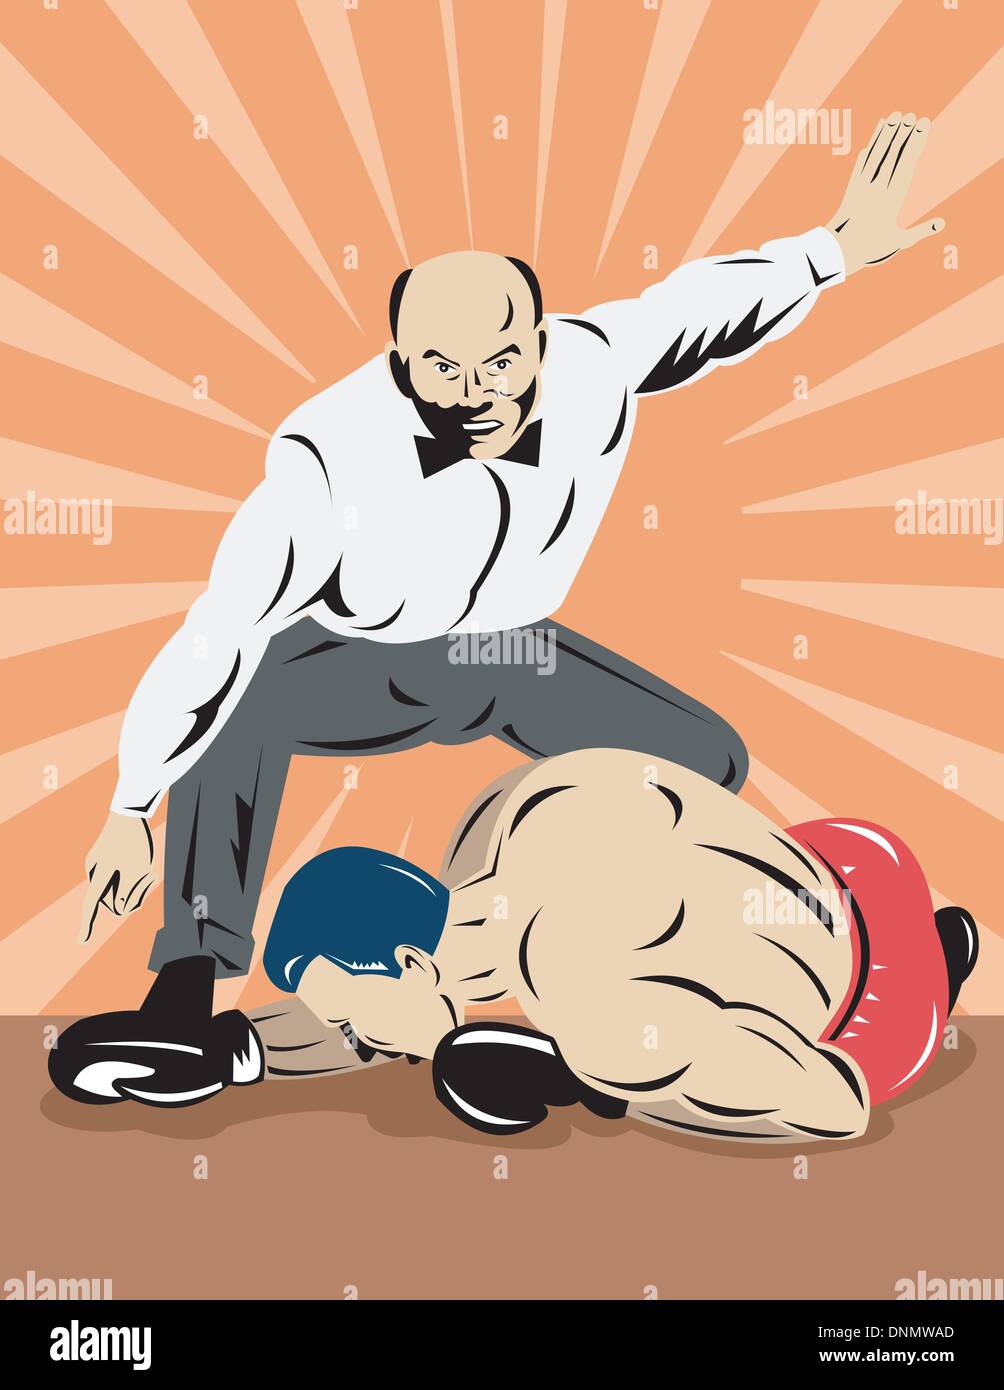 illustration of a referee counting down a boxer on floor done in retro style Stock Vector